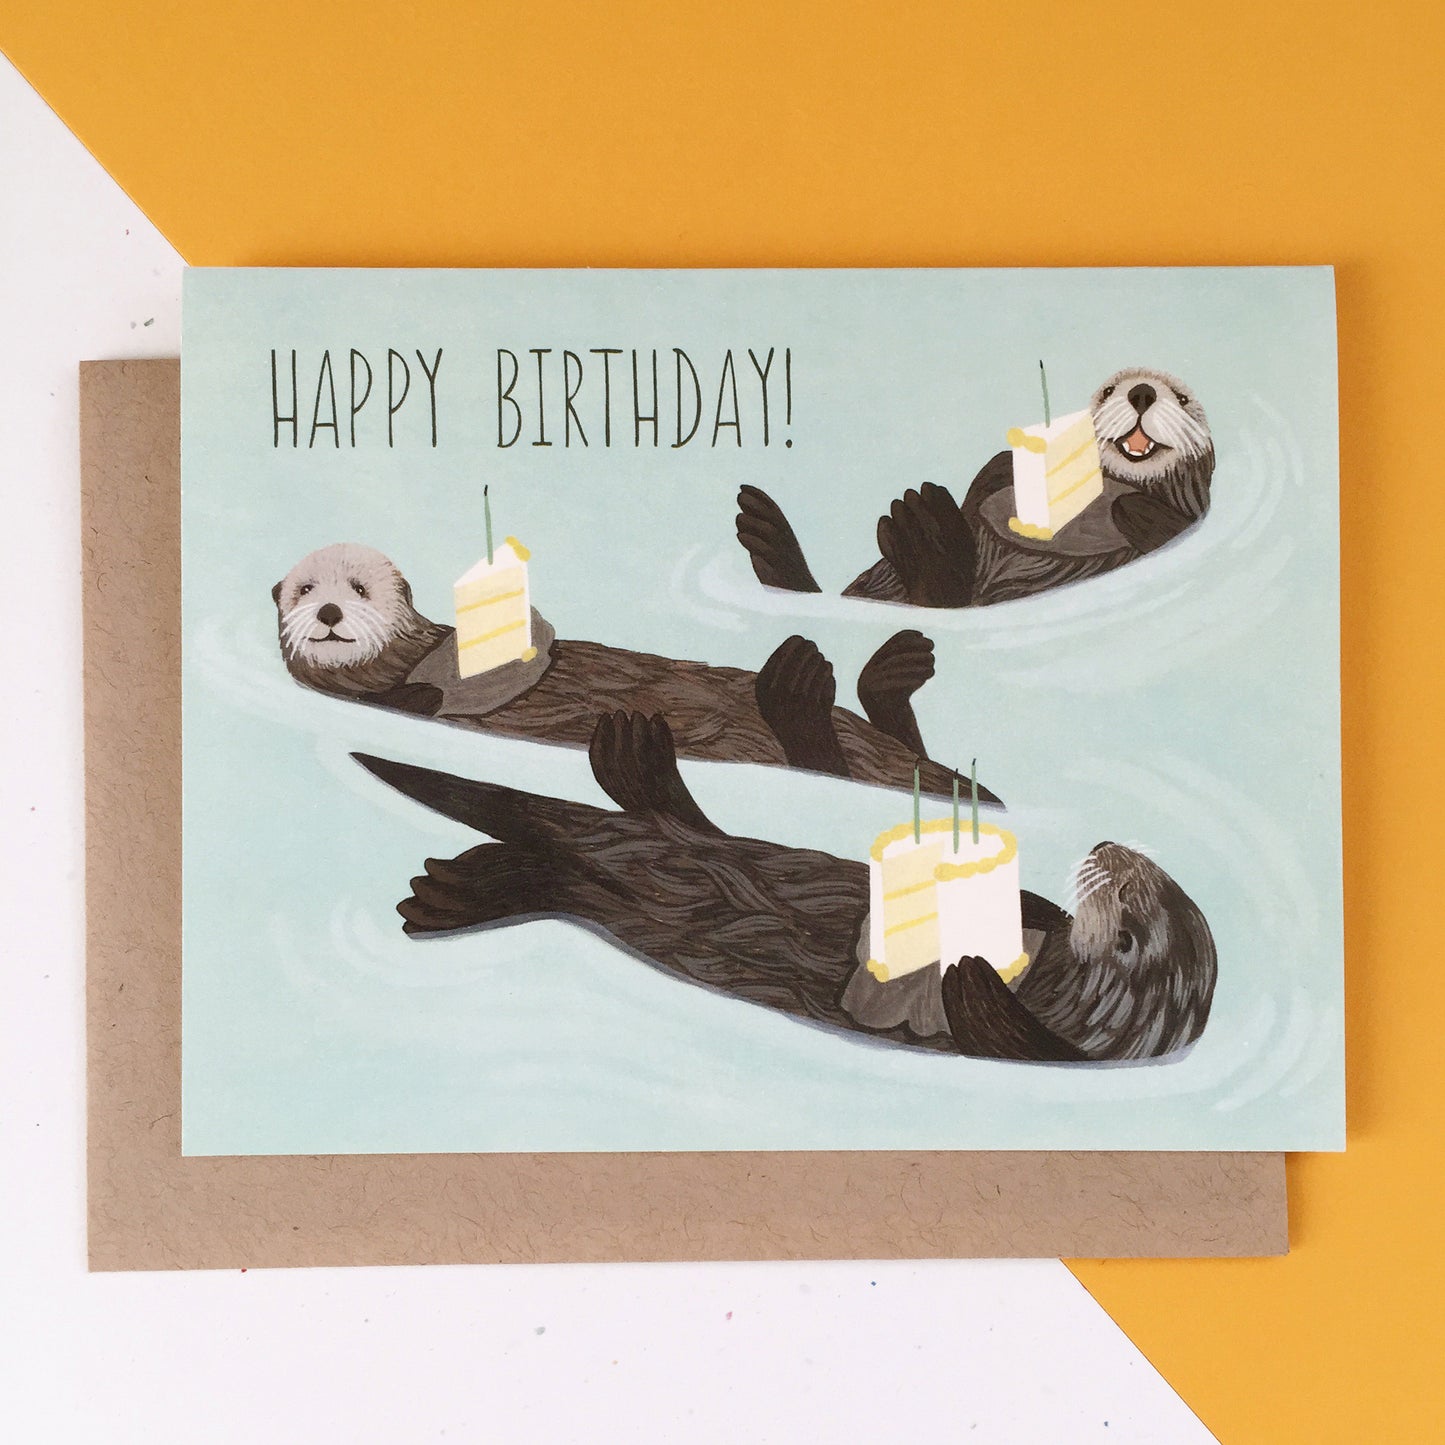 SEA OTTERS WITH CAKE - BIRTHDAY GREETING CARD